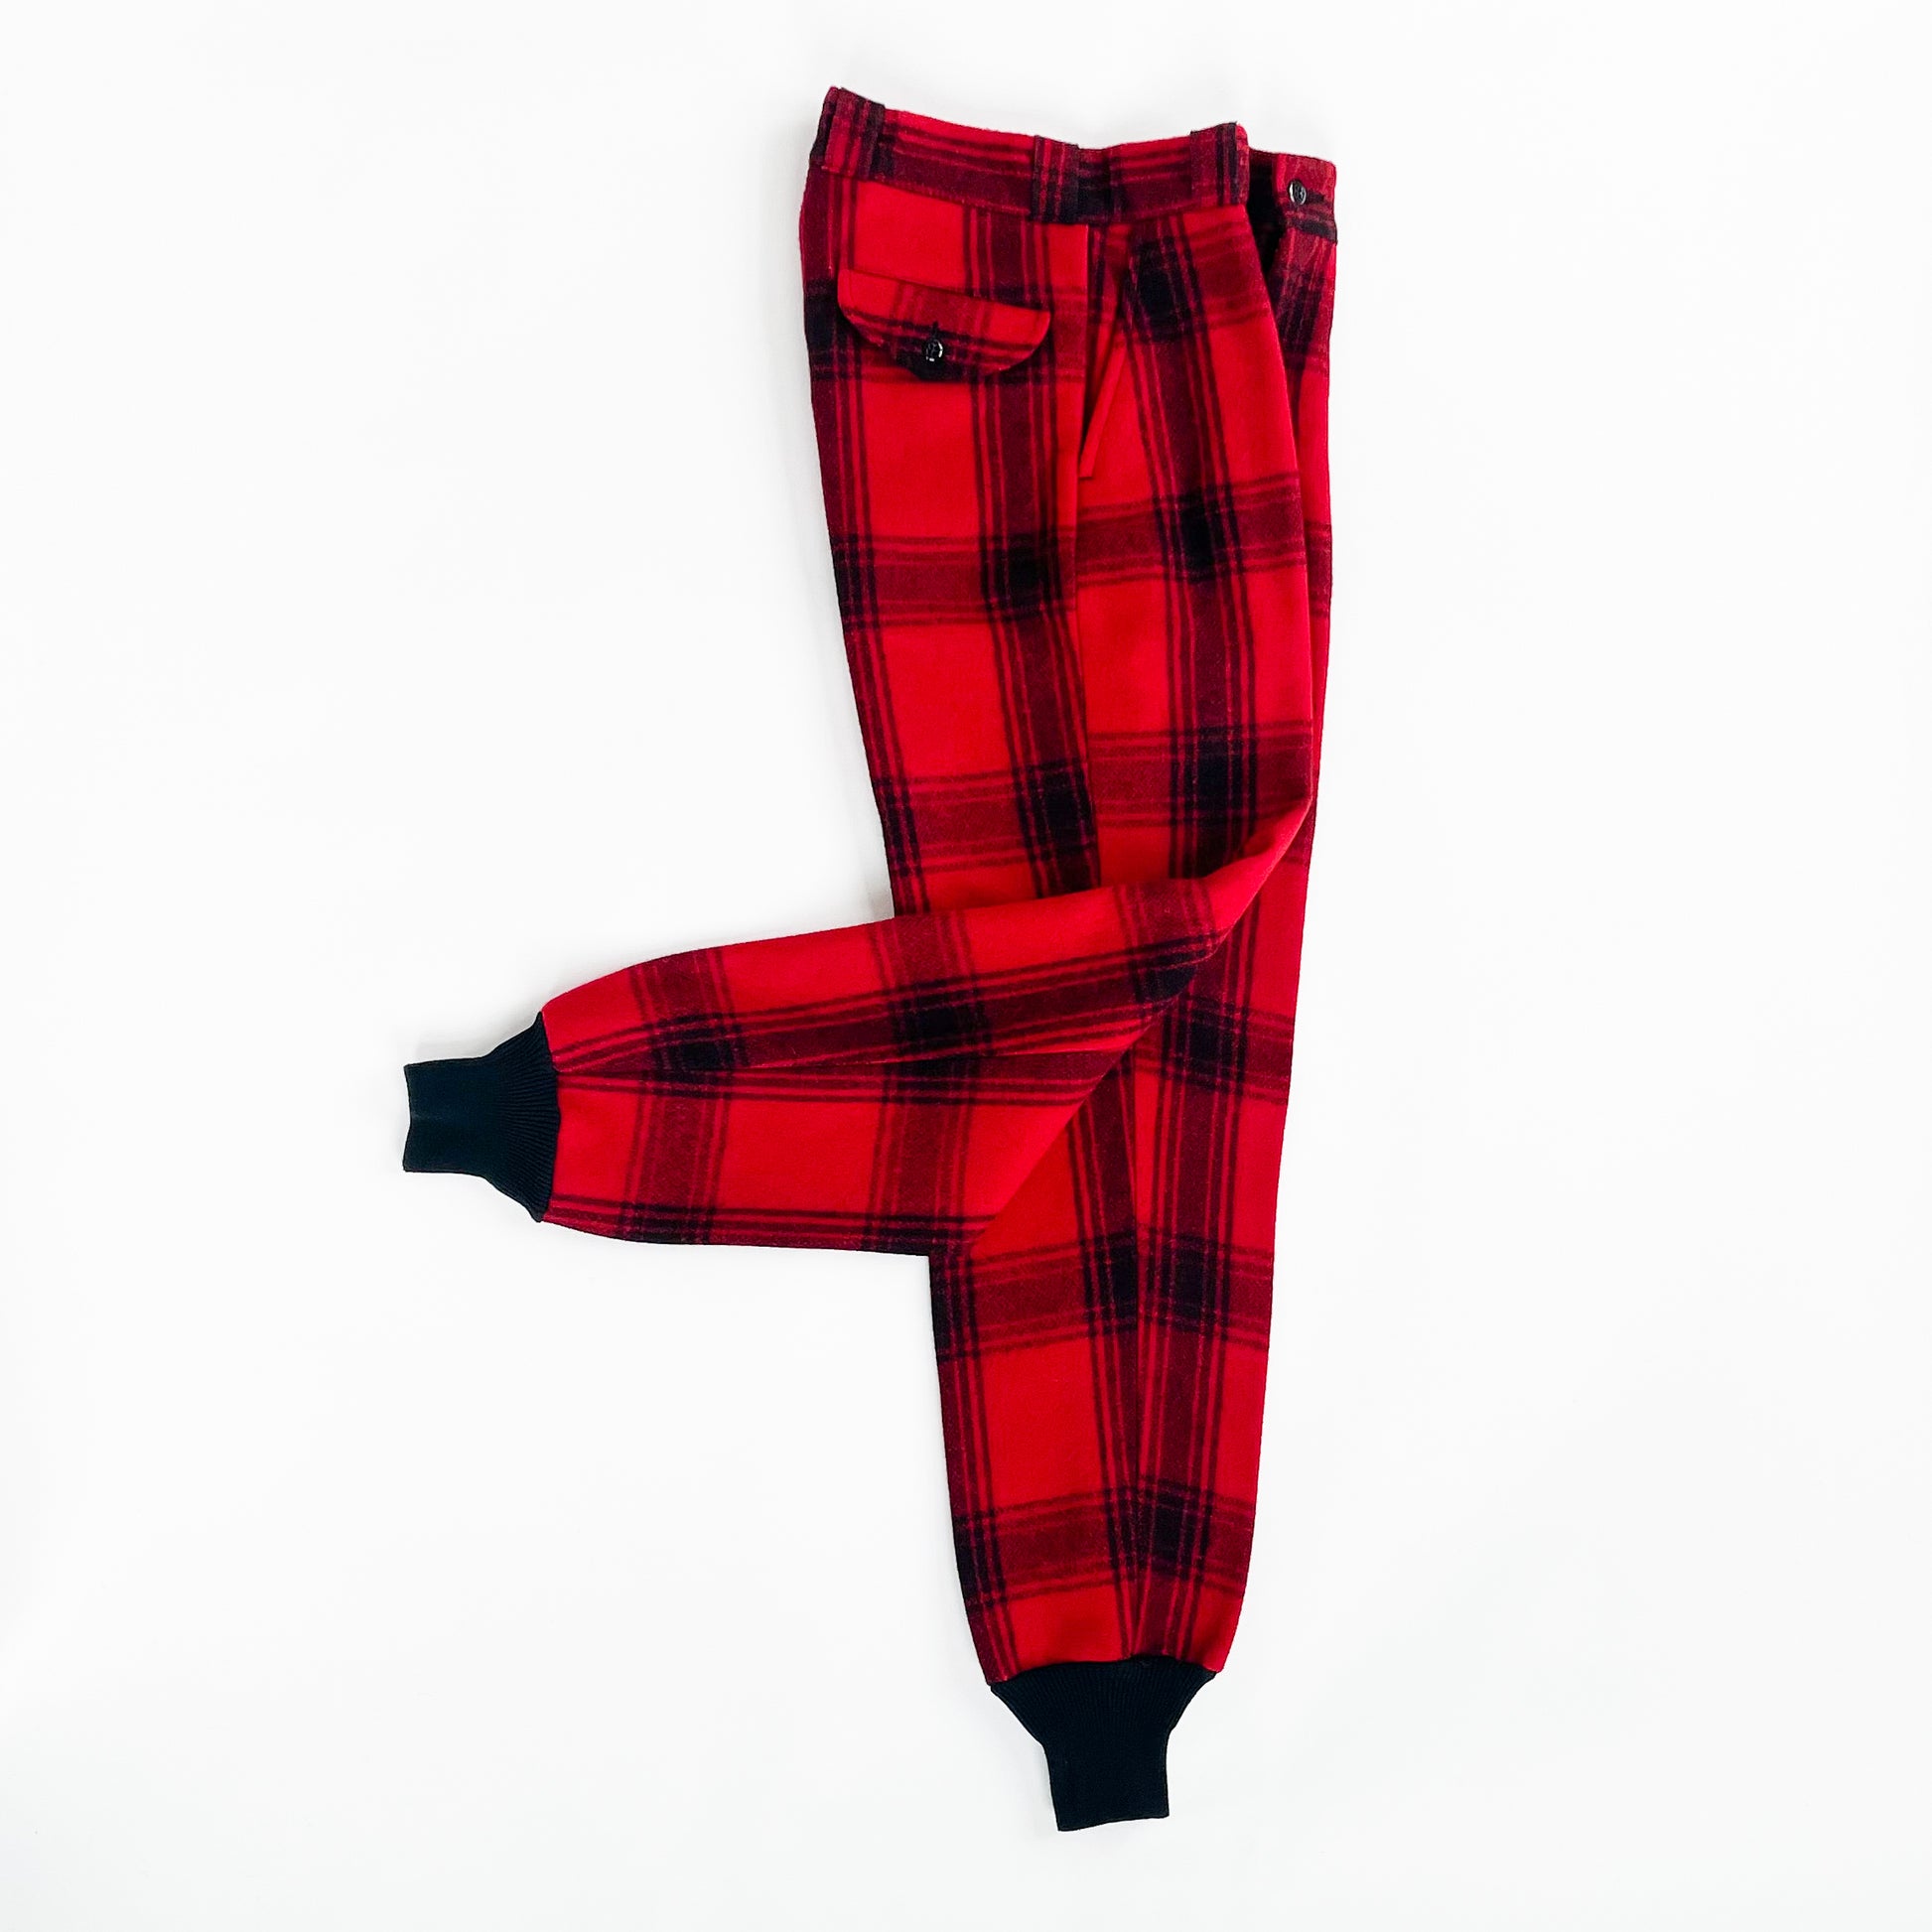 Johnson Woolen Mills Cuff Pants Bright Red & Black Muted Plaid side view